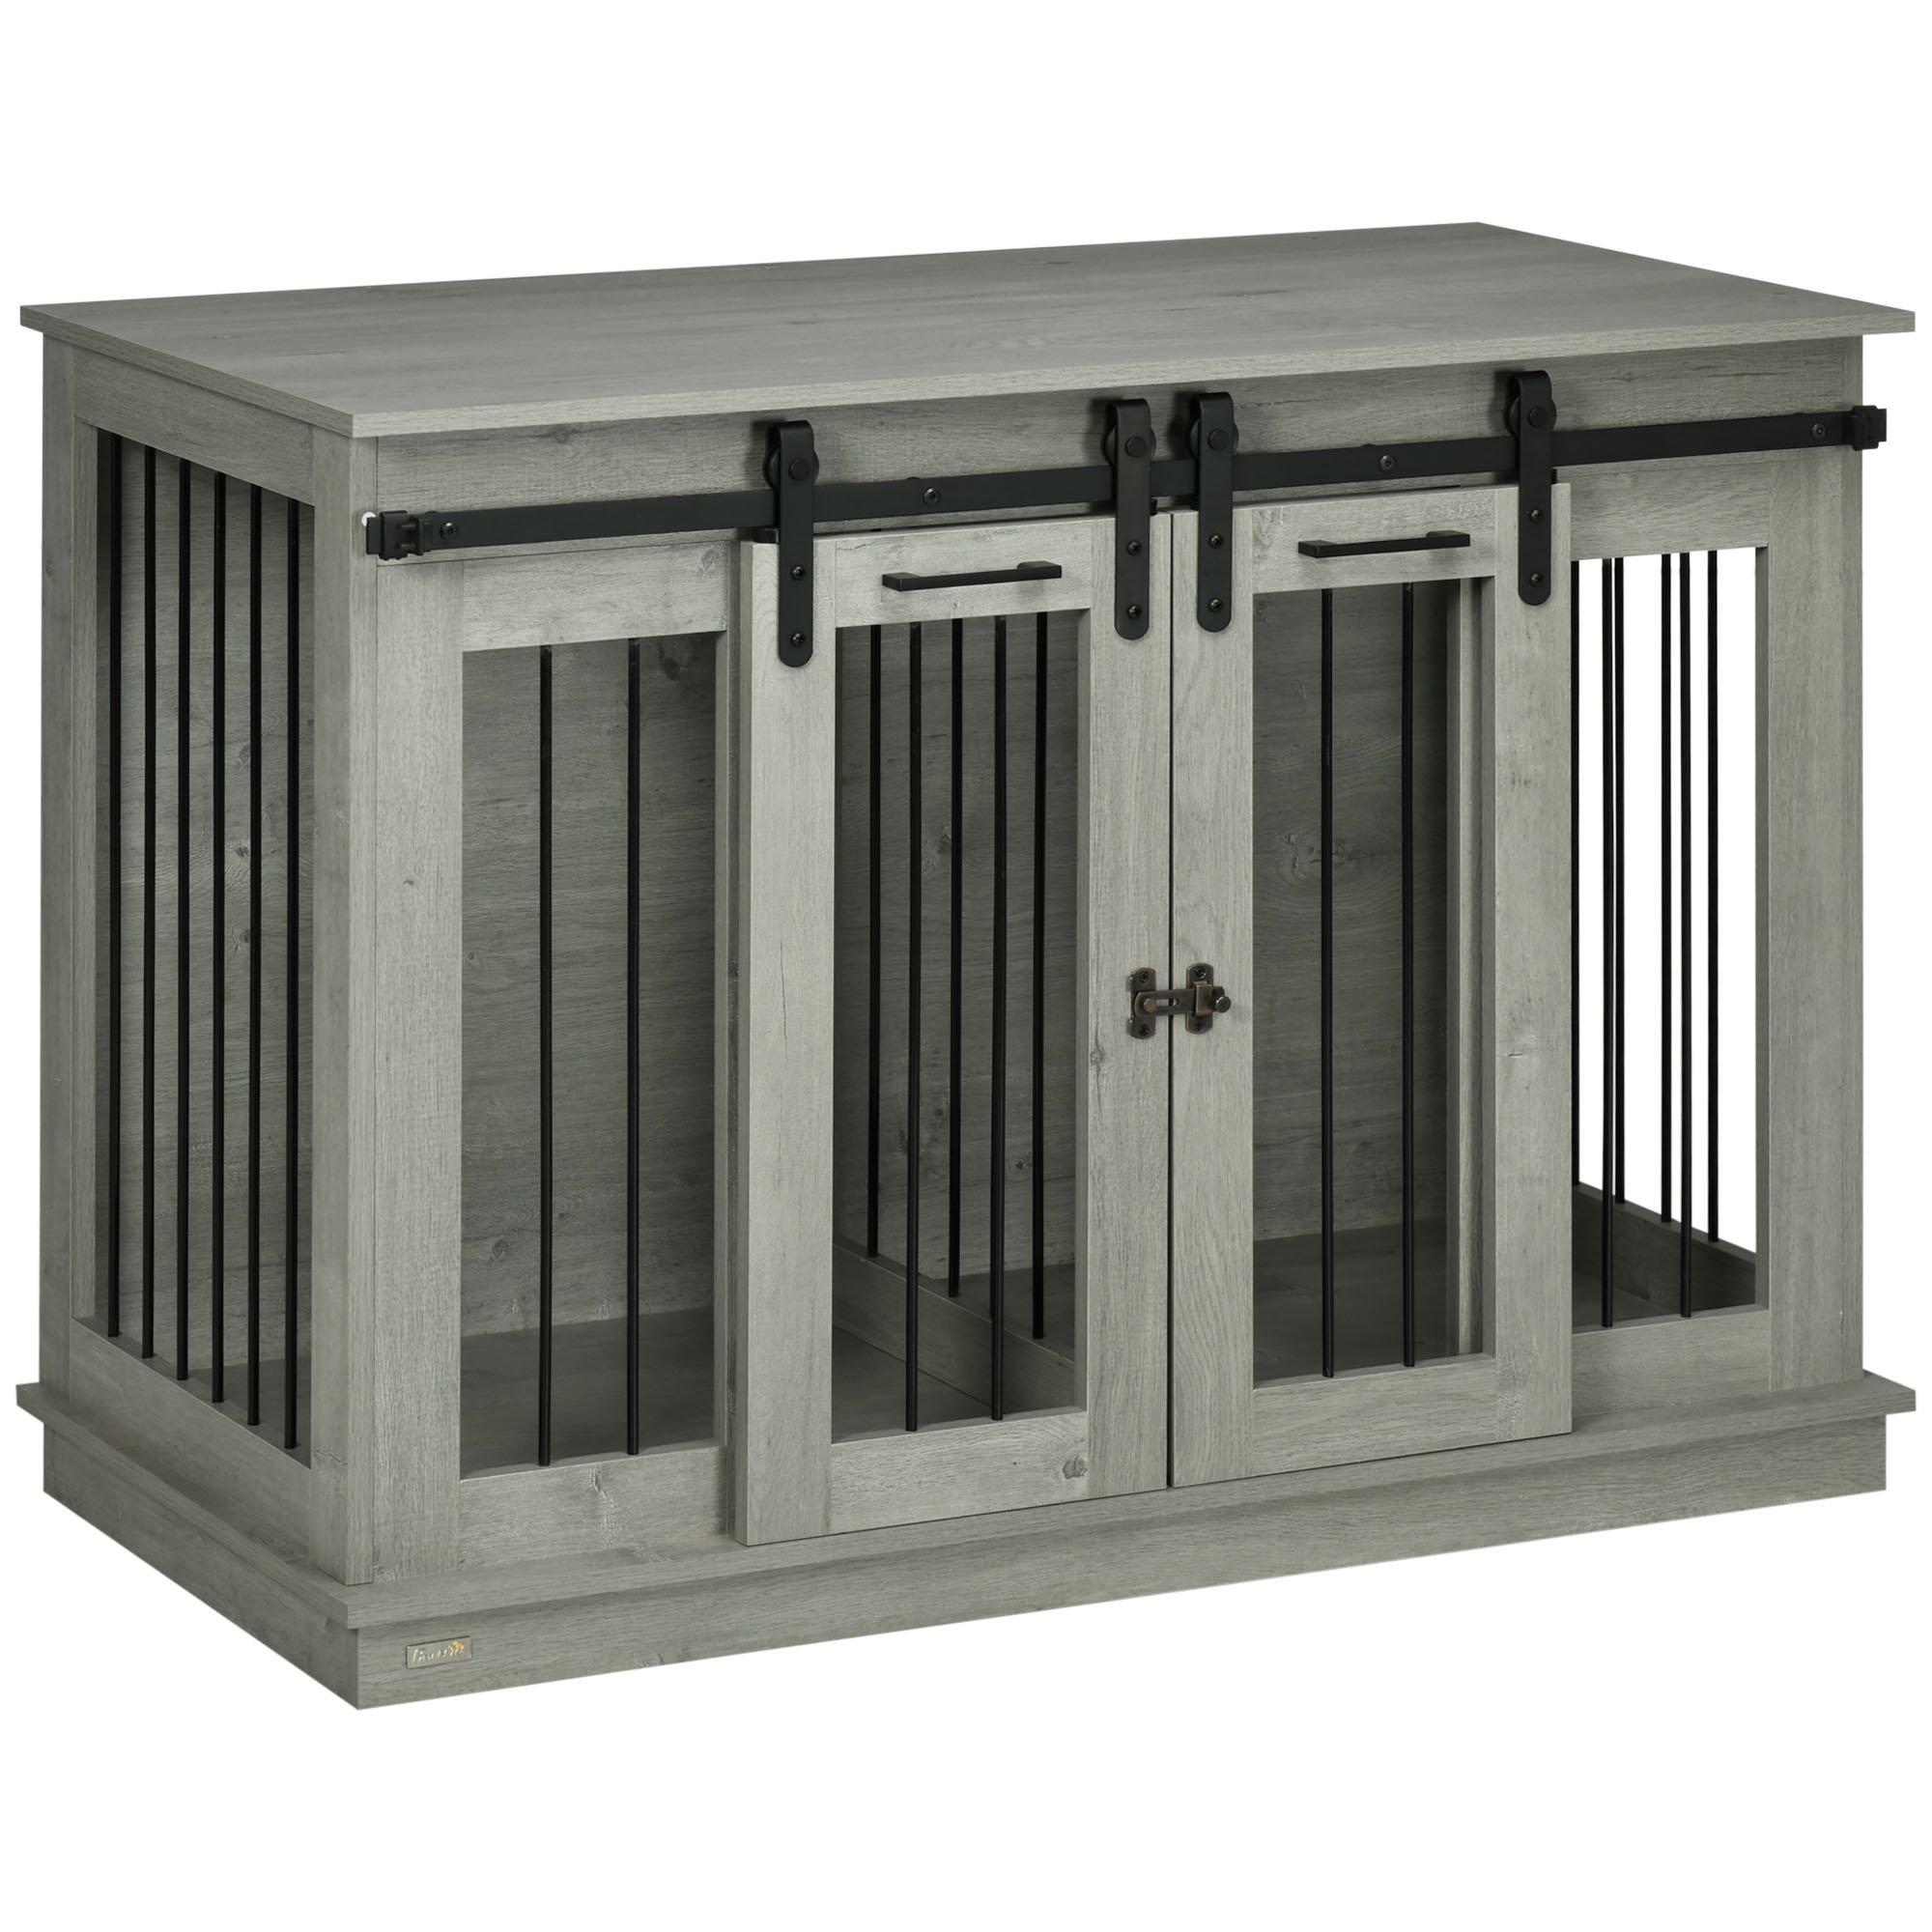 Dog Crate Furniture for Large Dog, Double Dog Cage for Small Dogs with Divider